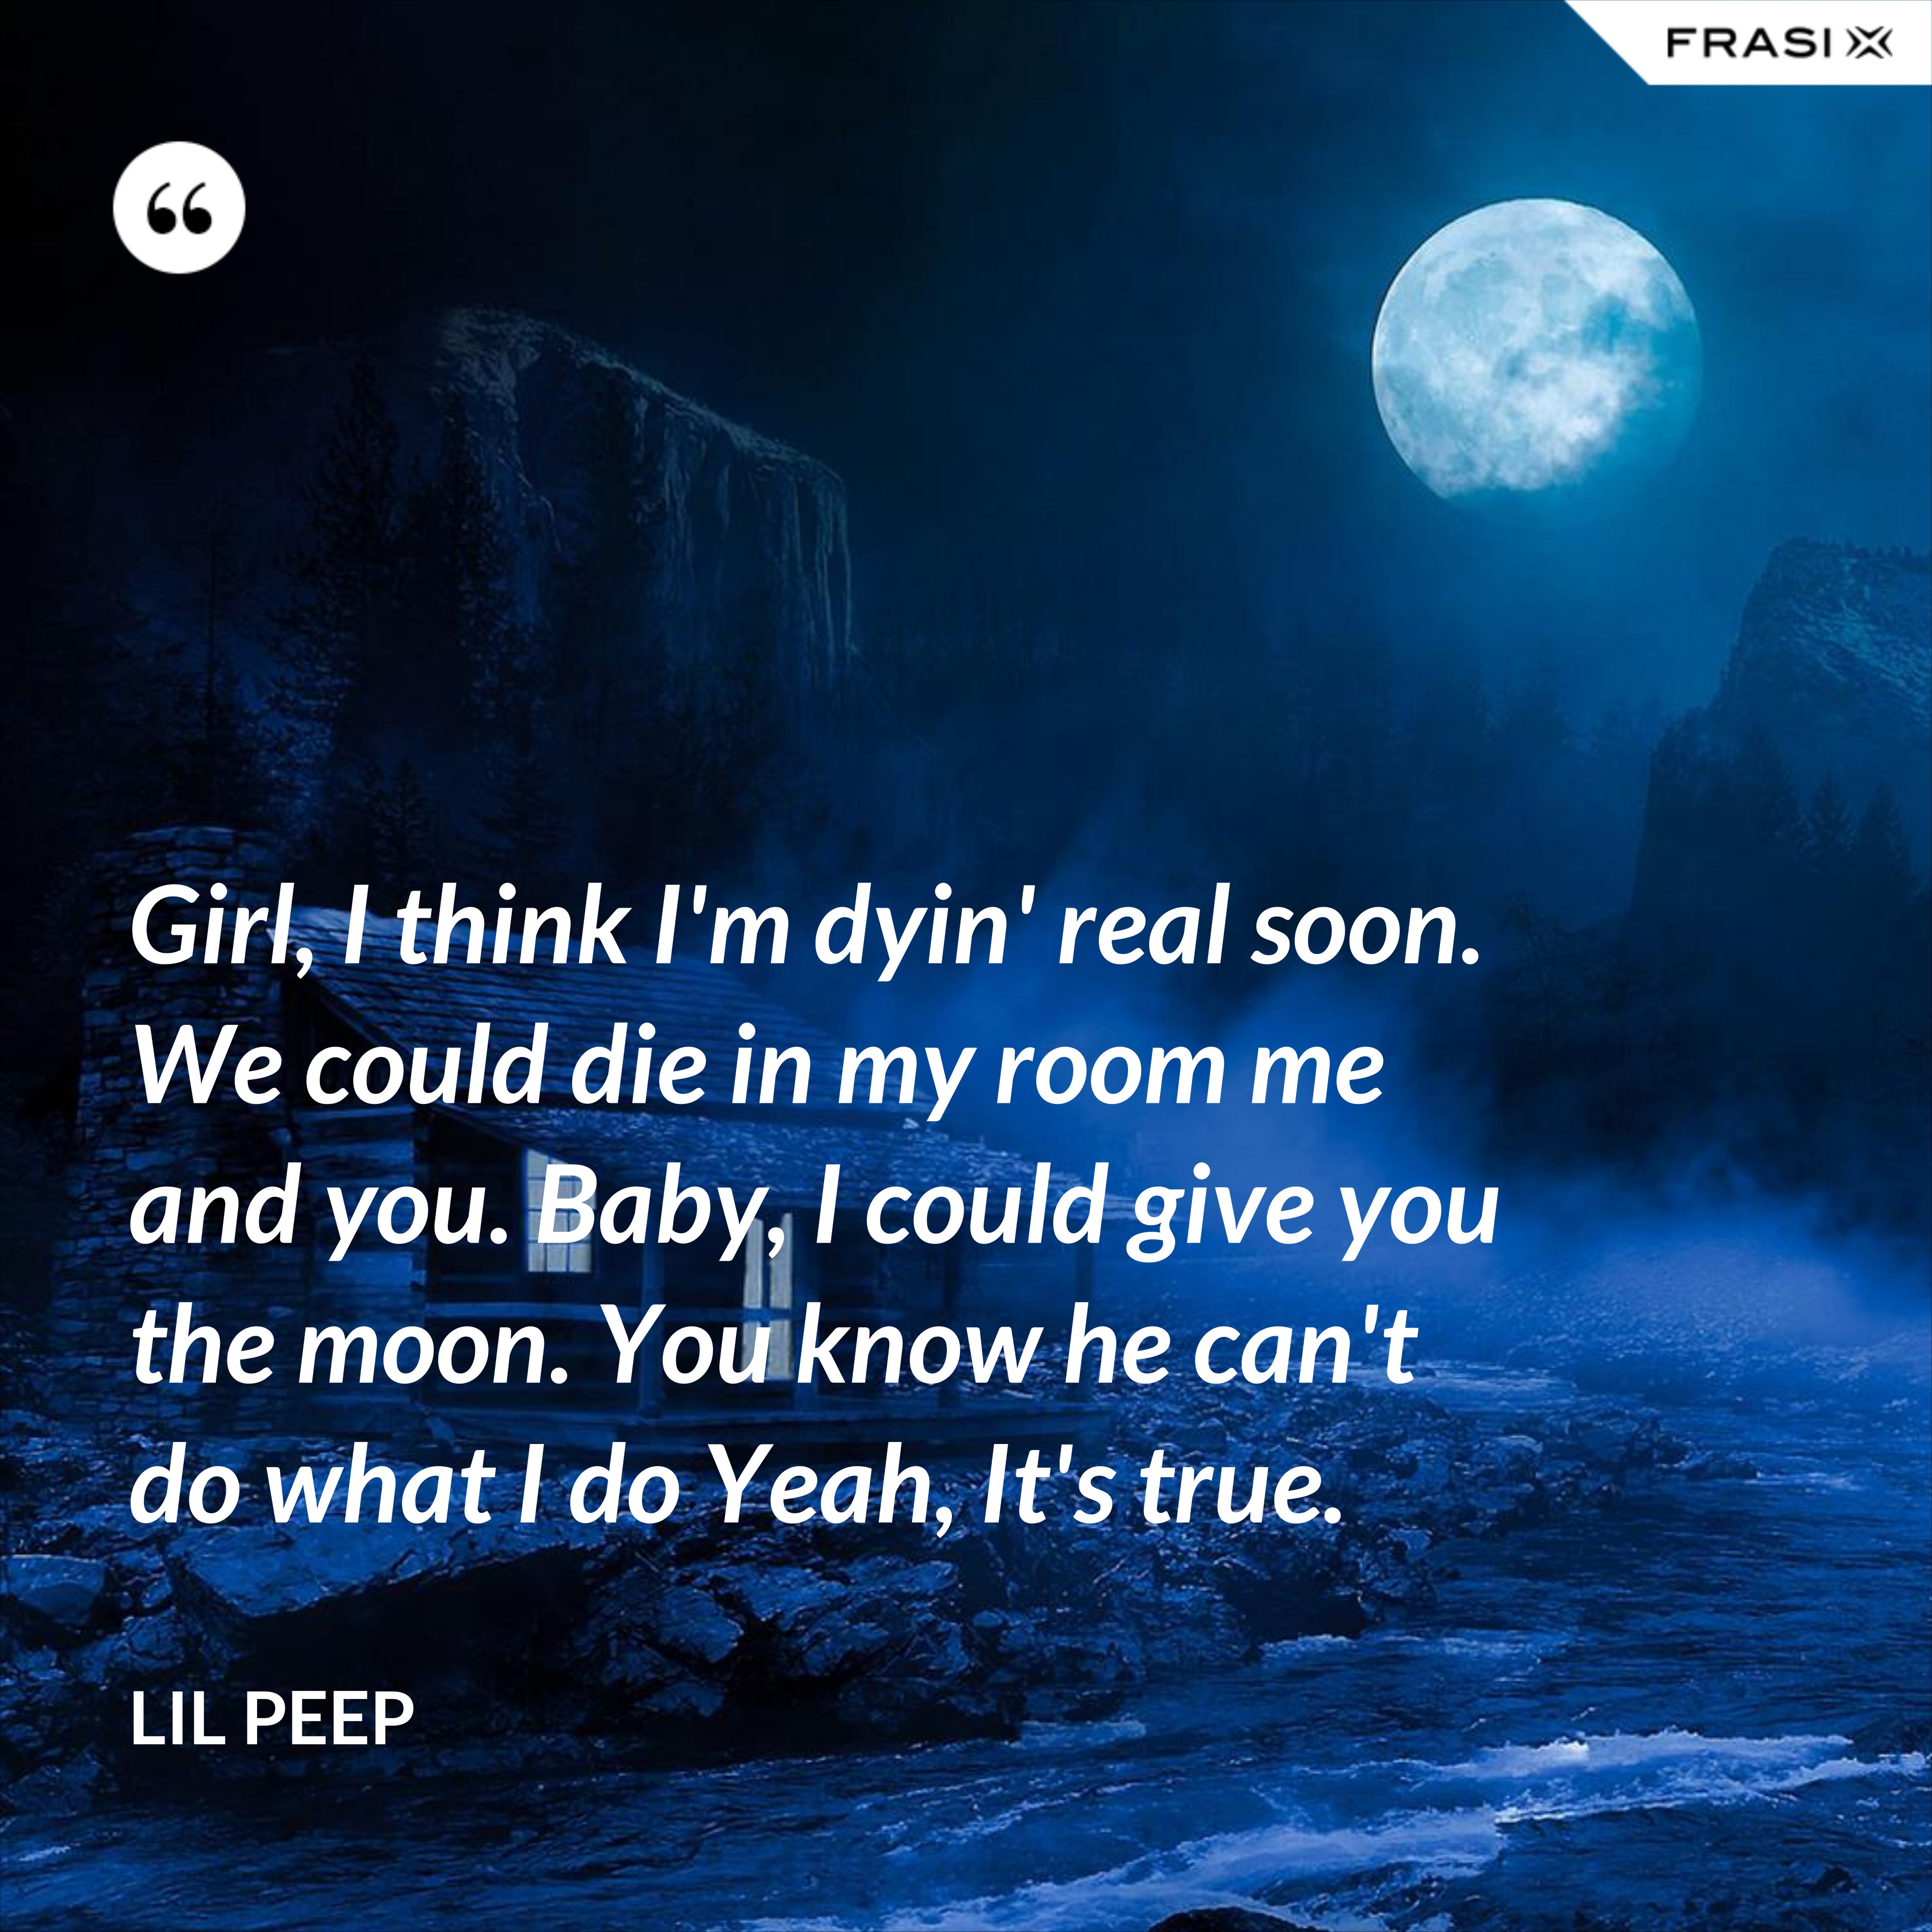 Girl, I think I'm dyin' real soon. We could die in my room me and you. Baby, I could give you the moon. You know he can't do what I do Yeah, It's true. - Lil Peep